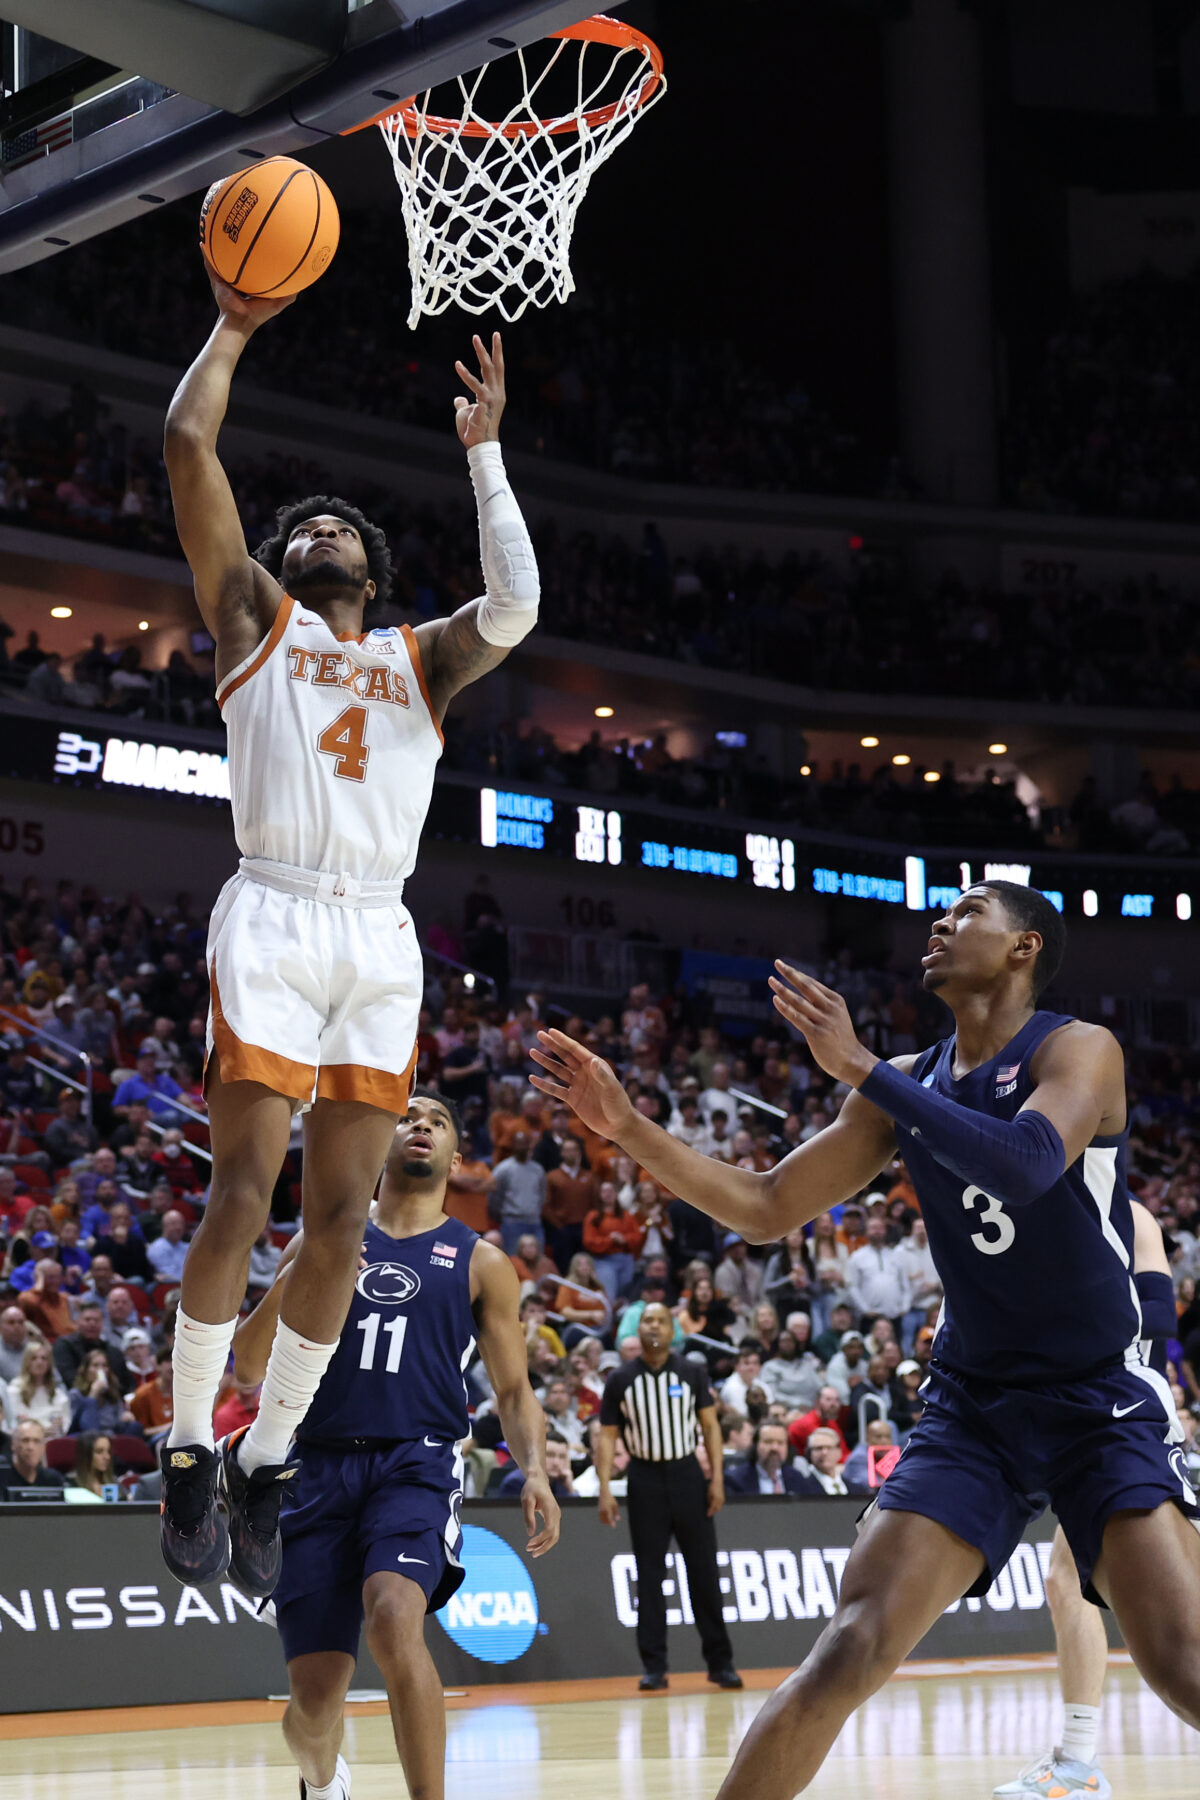 Texas basketball survives upset scare in exhibition with St. Edward’s